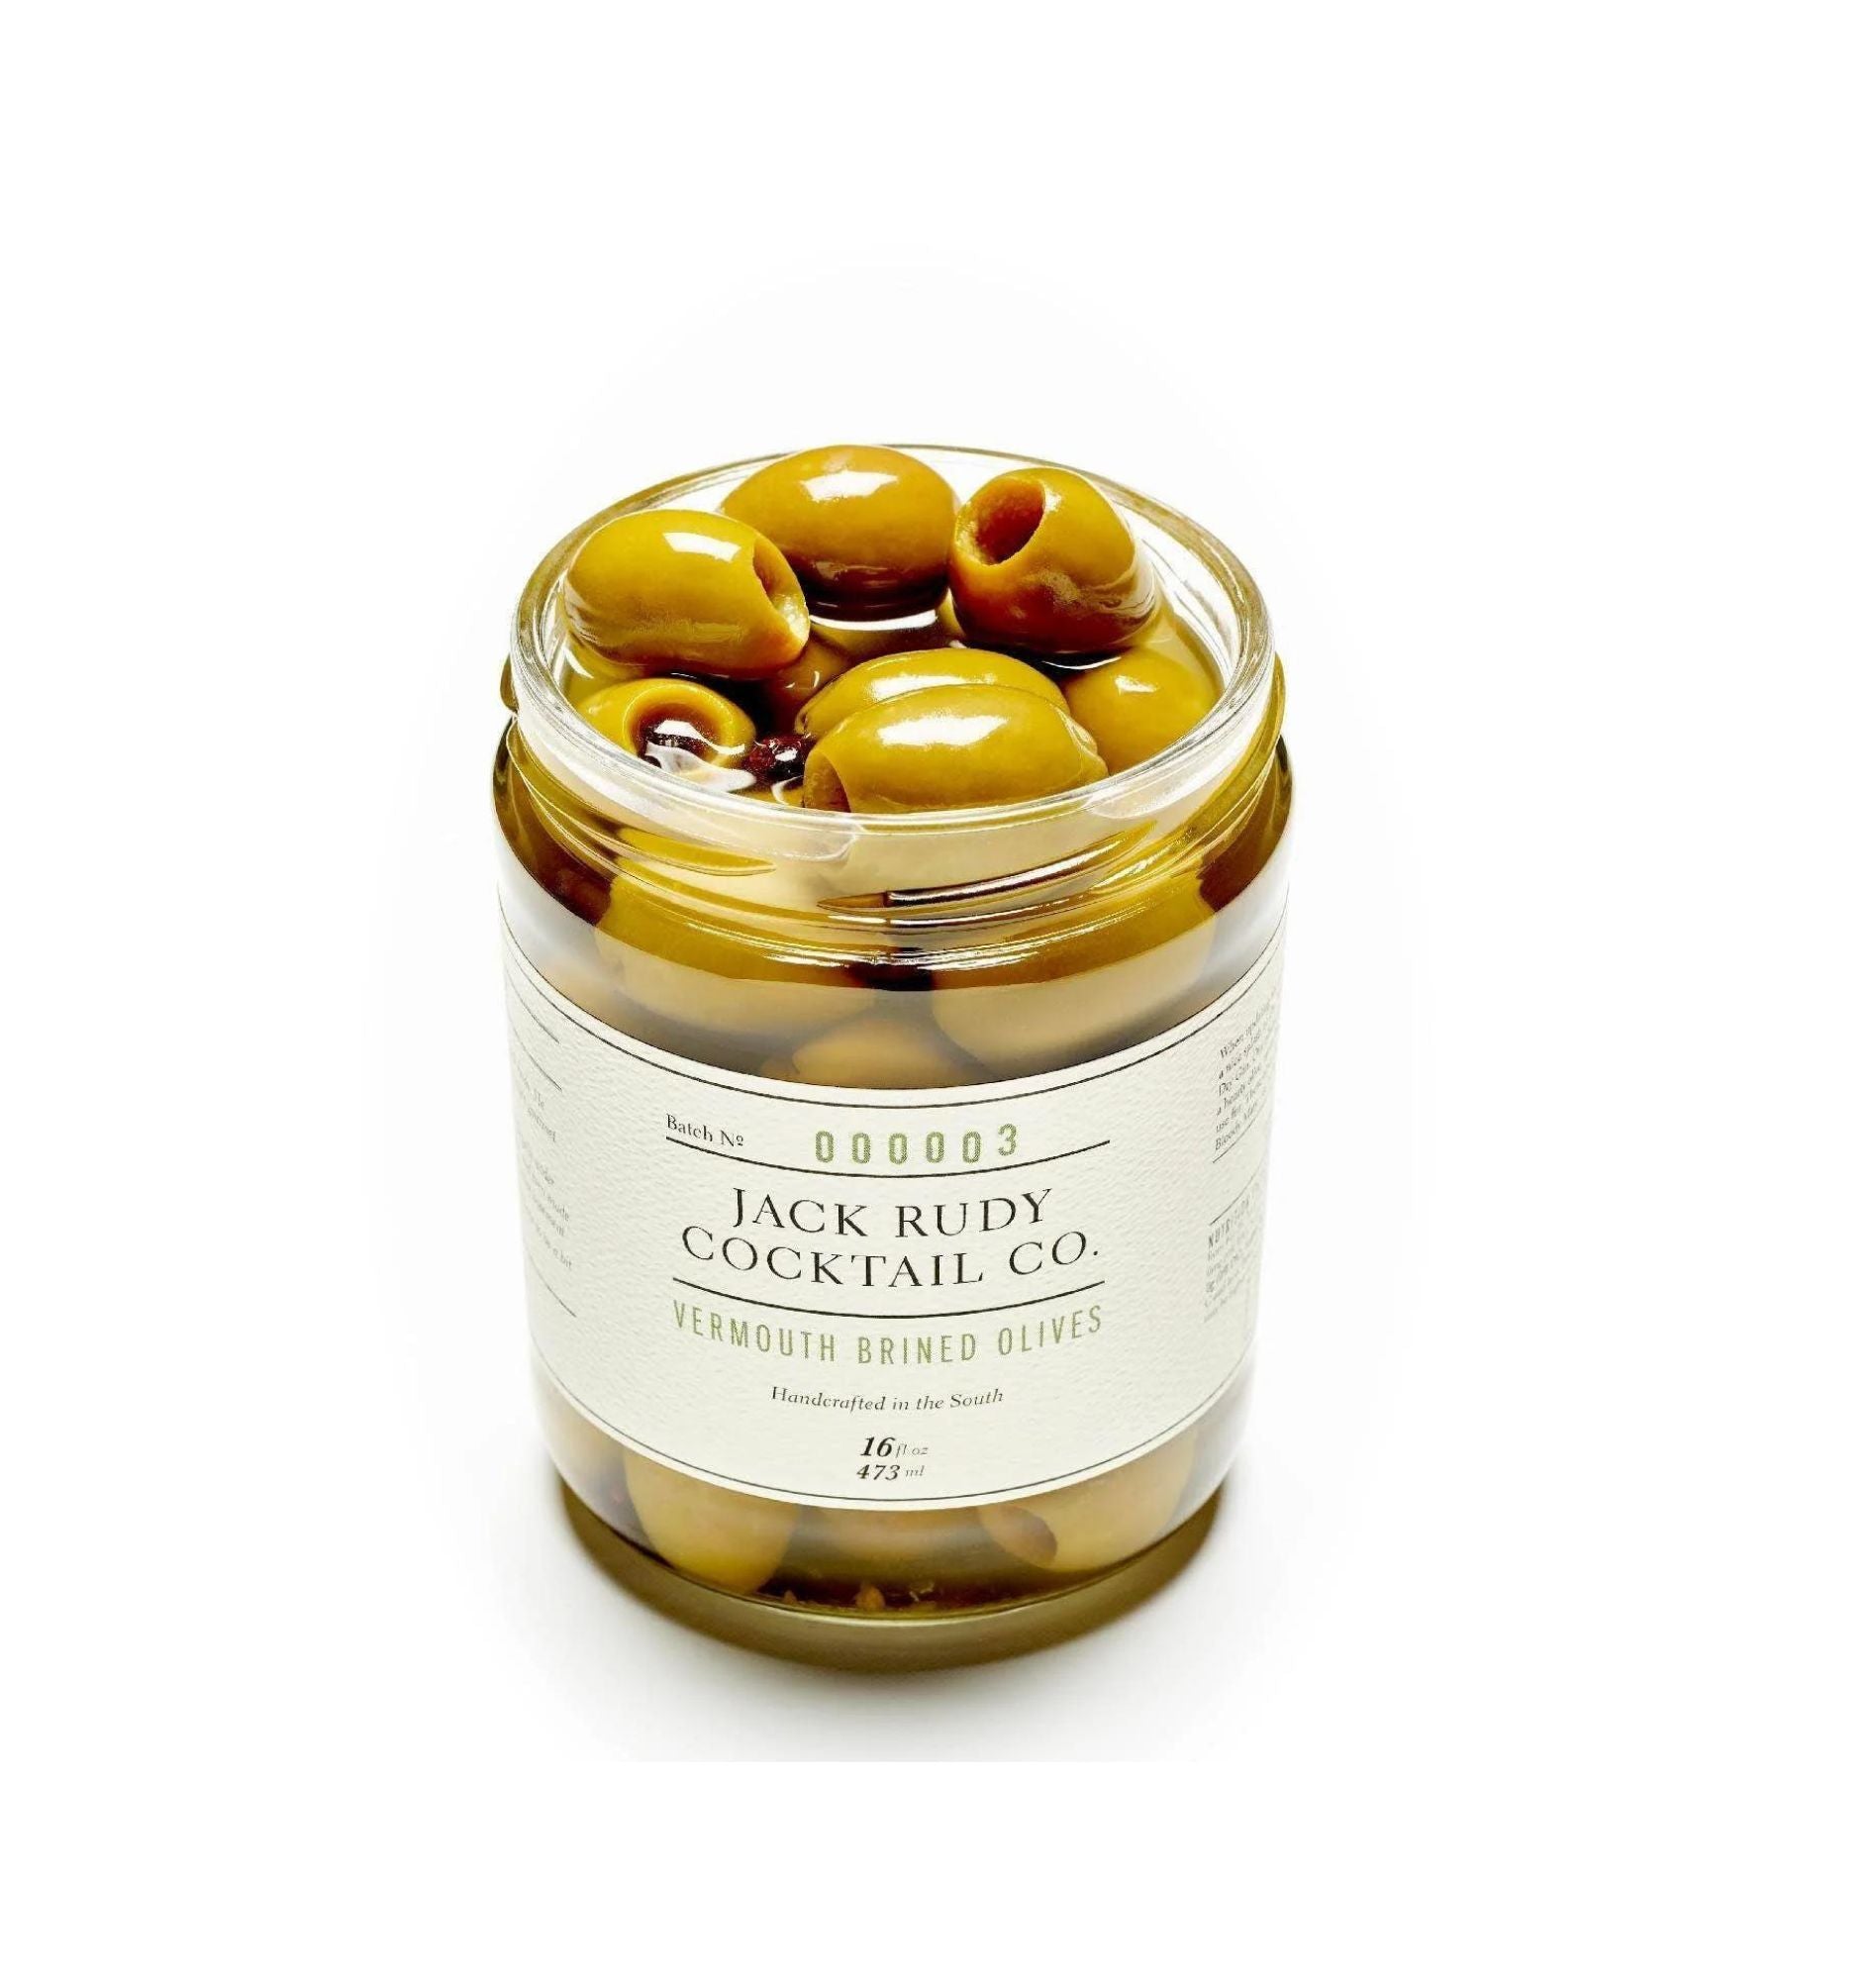 Jack Rudy Vermouth Olives / 16 oz.